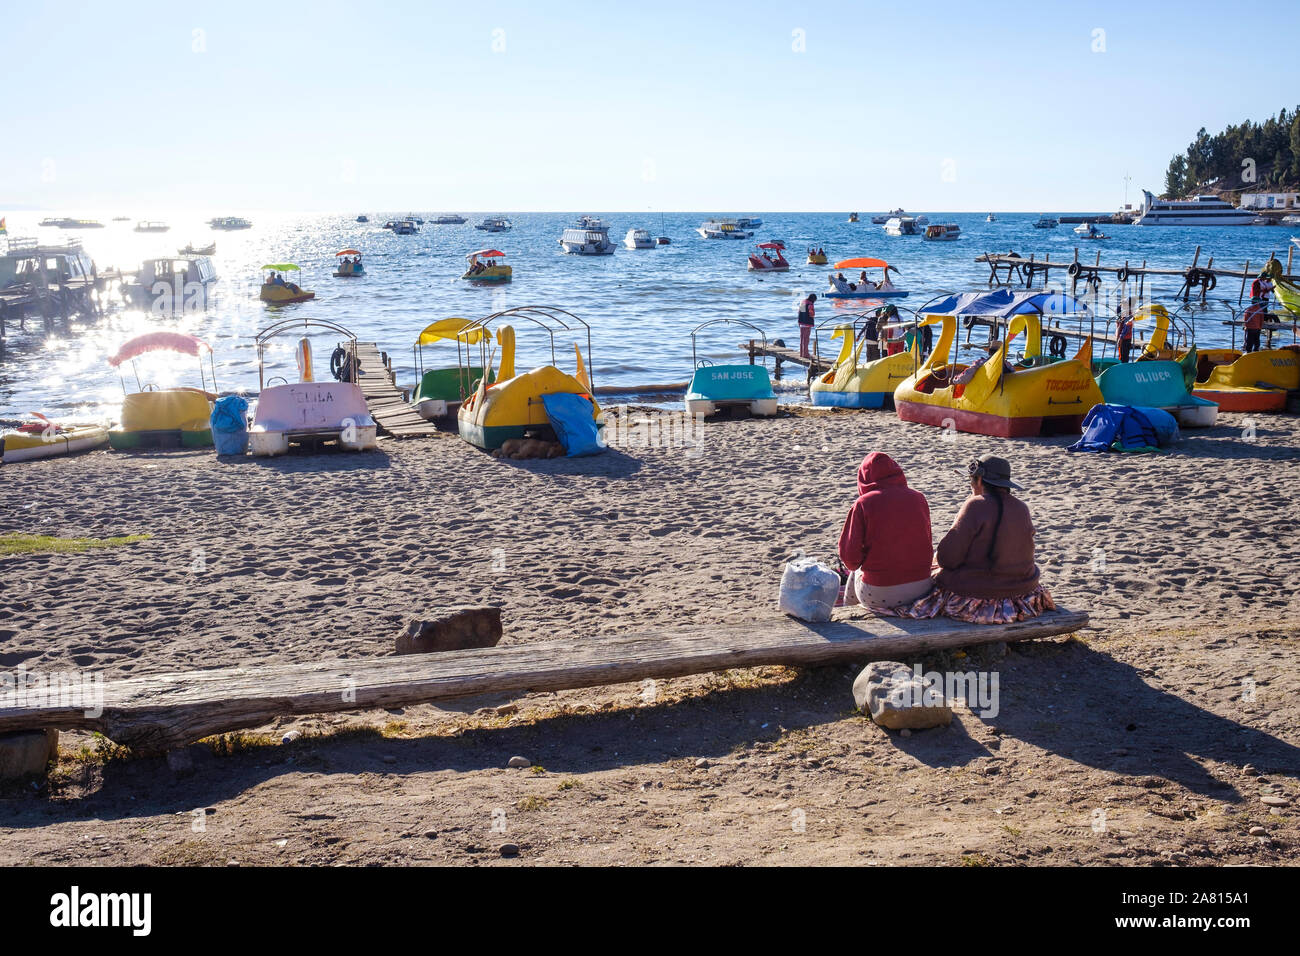 Local people and duck-shaped boats in Copacabana beach, Bolivia Stock Photo